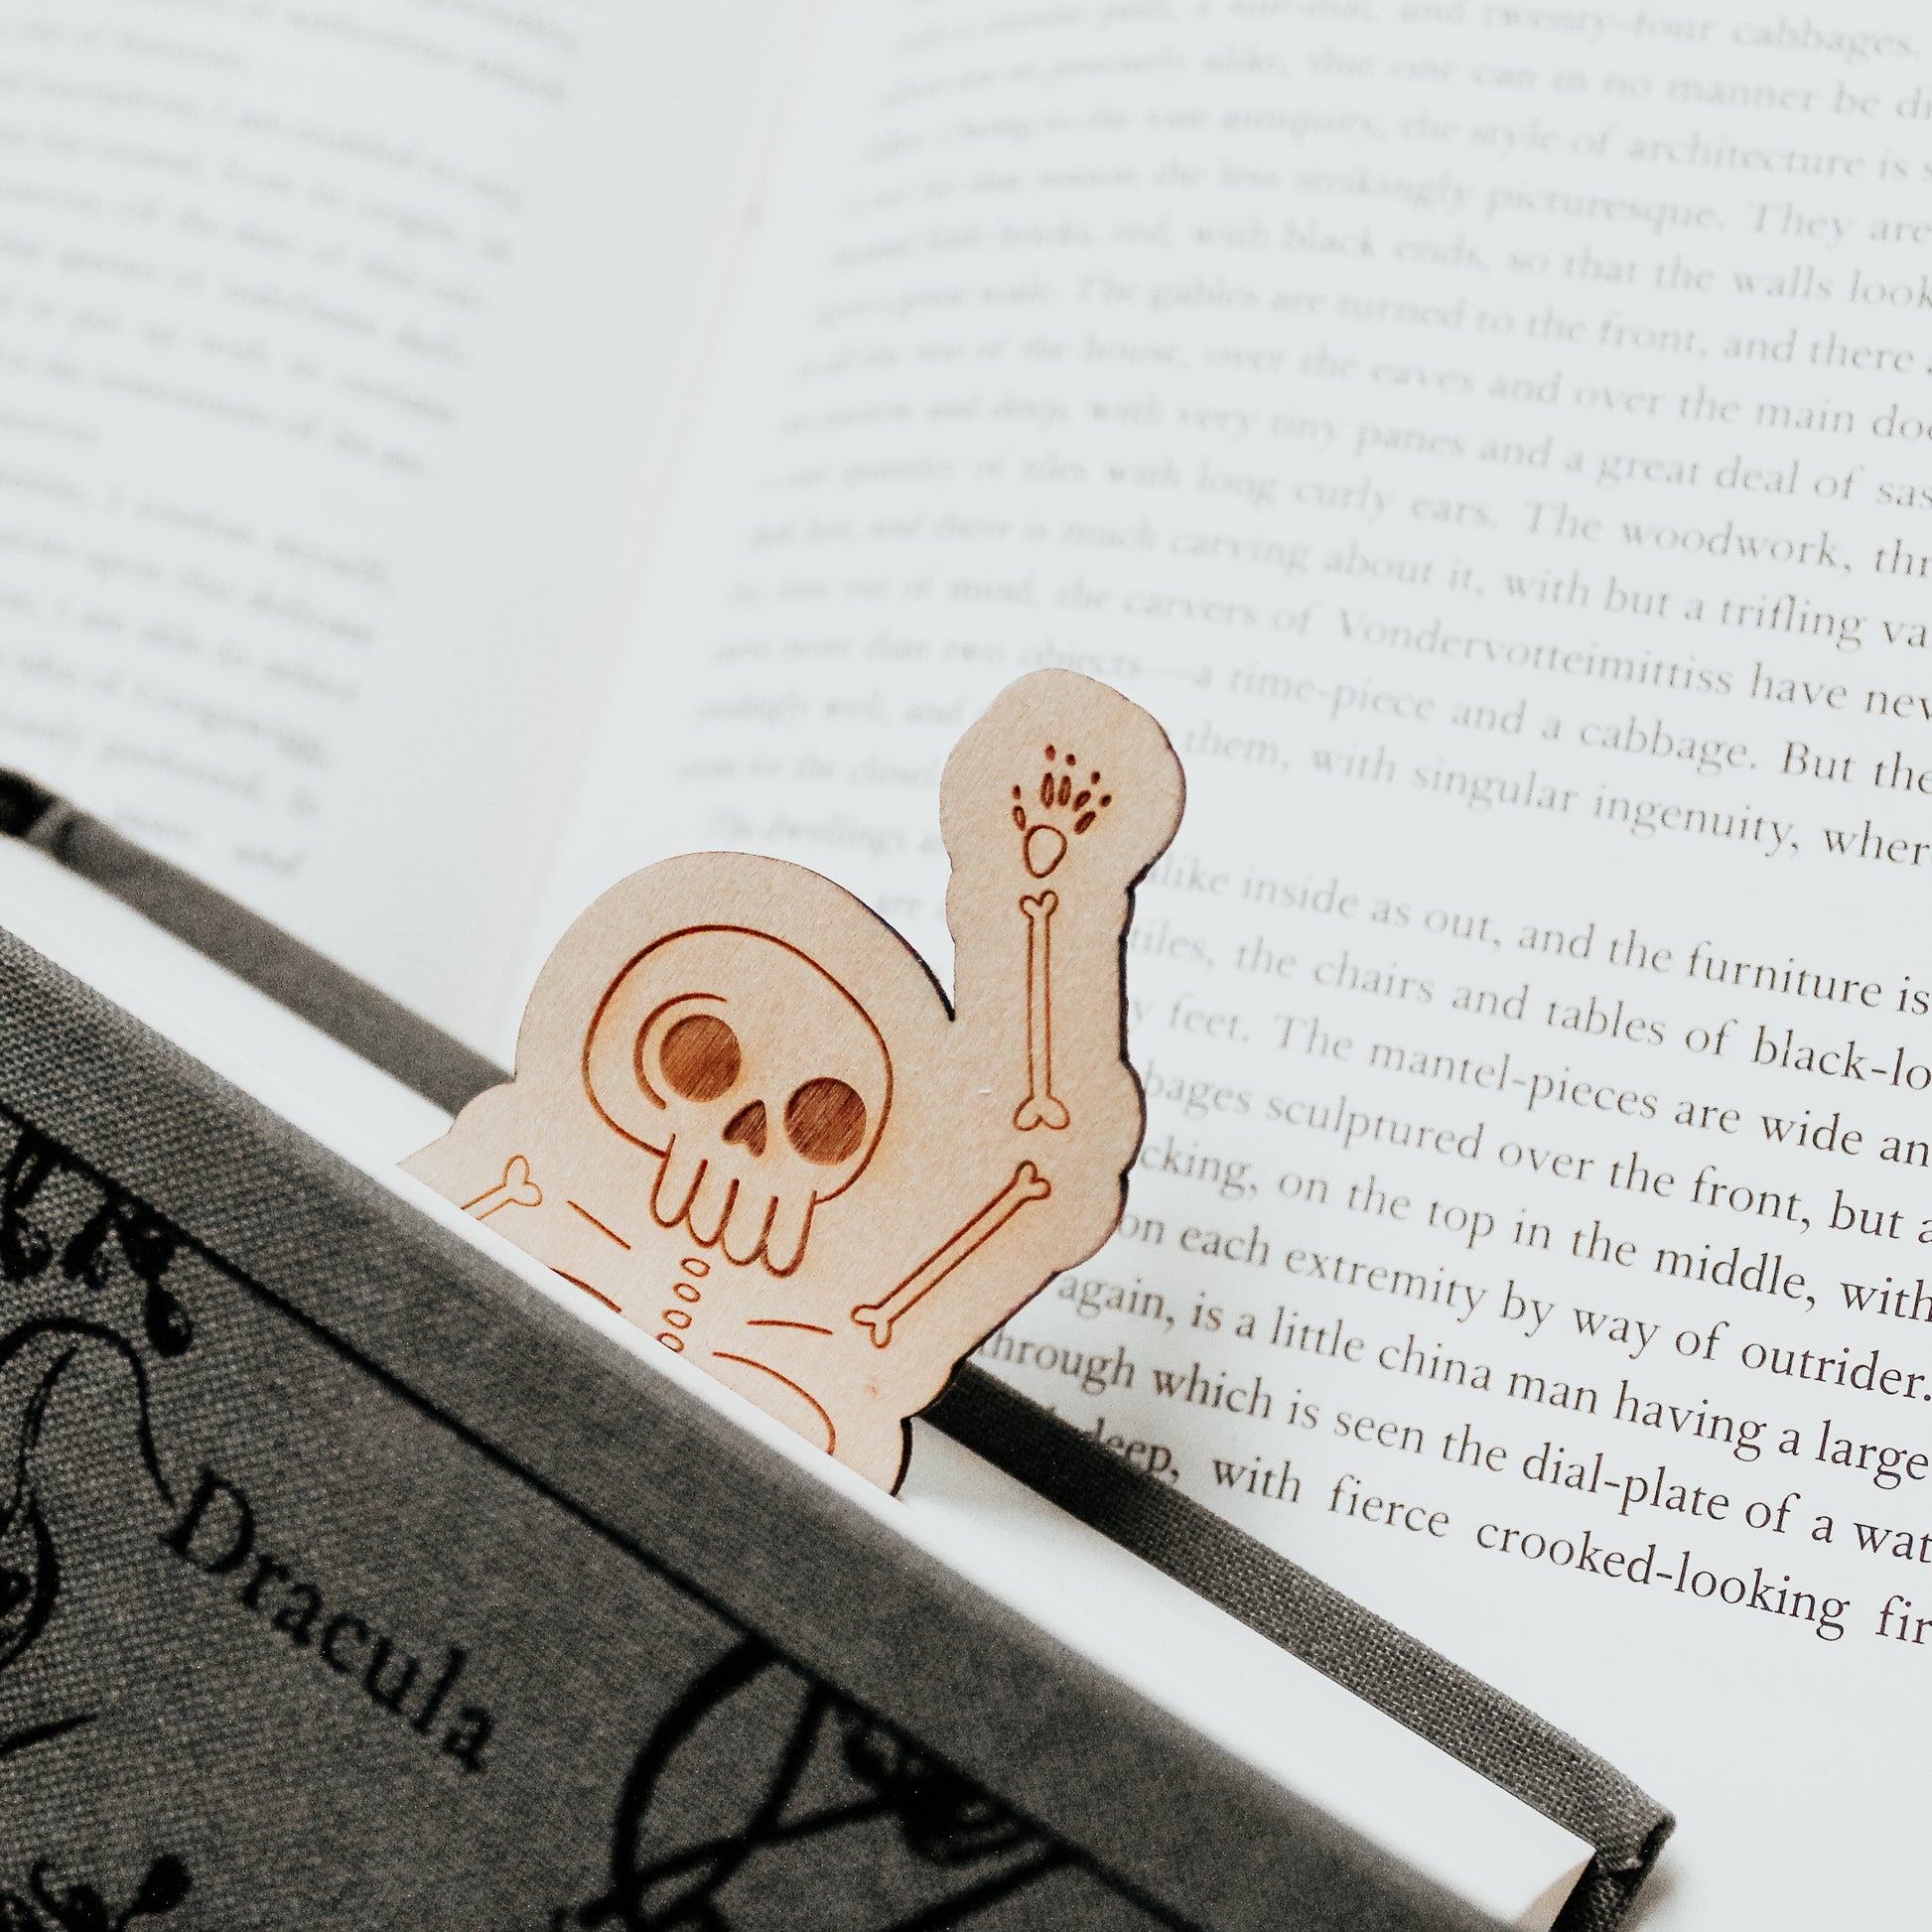 Skeleton bookmark, made from wood and engraved with a skeleton design, peeking their head out of a Dracula horror book and waving 